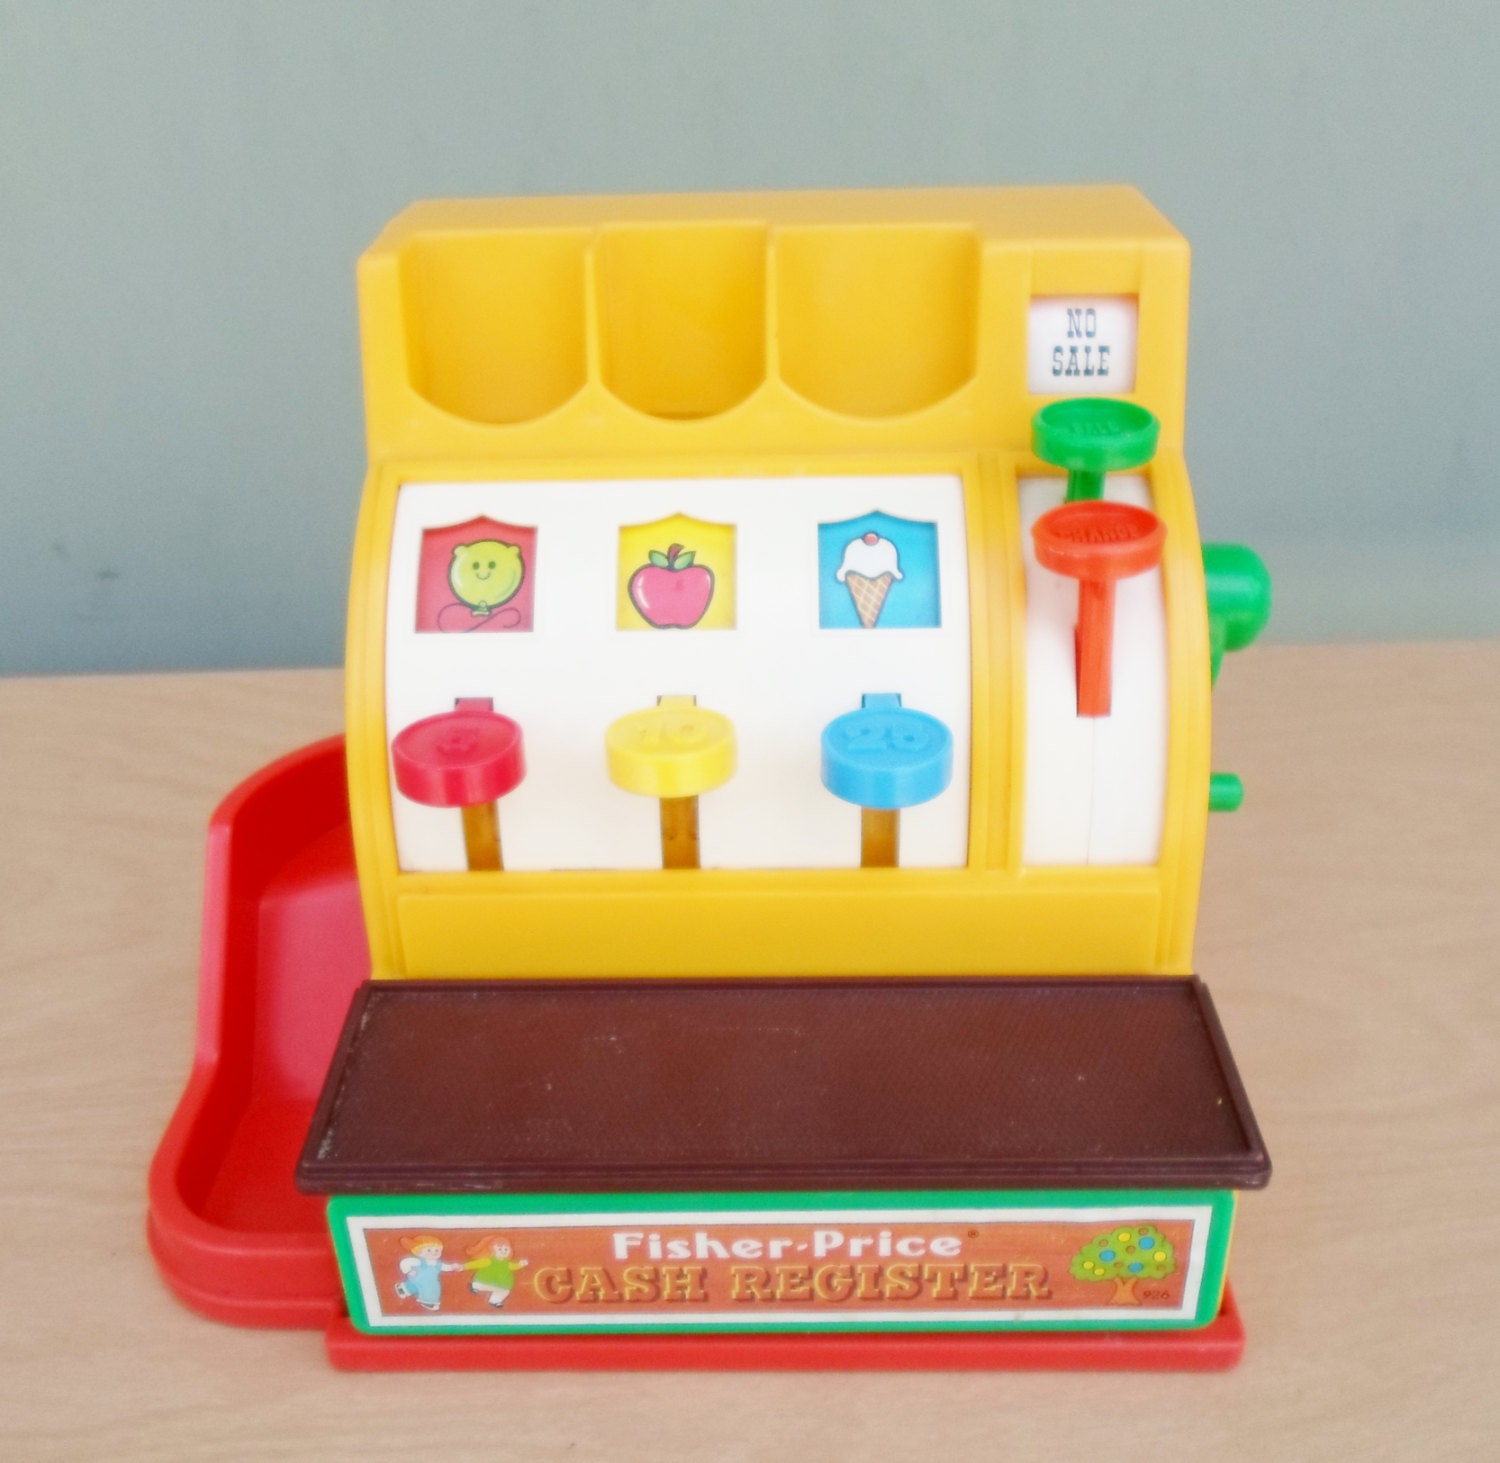 Vintage 1974 Fisher Price Toy Cash Register made in East